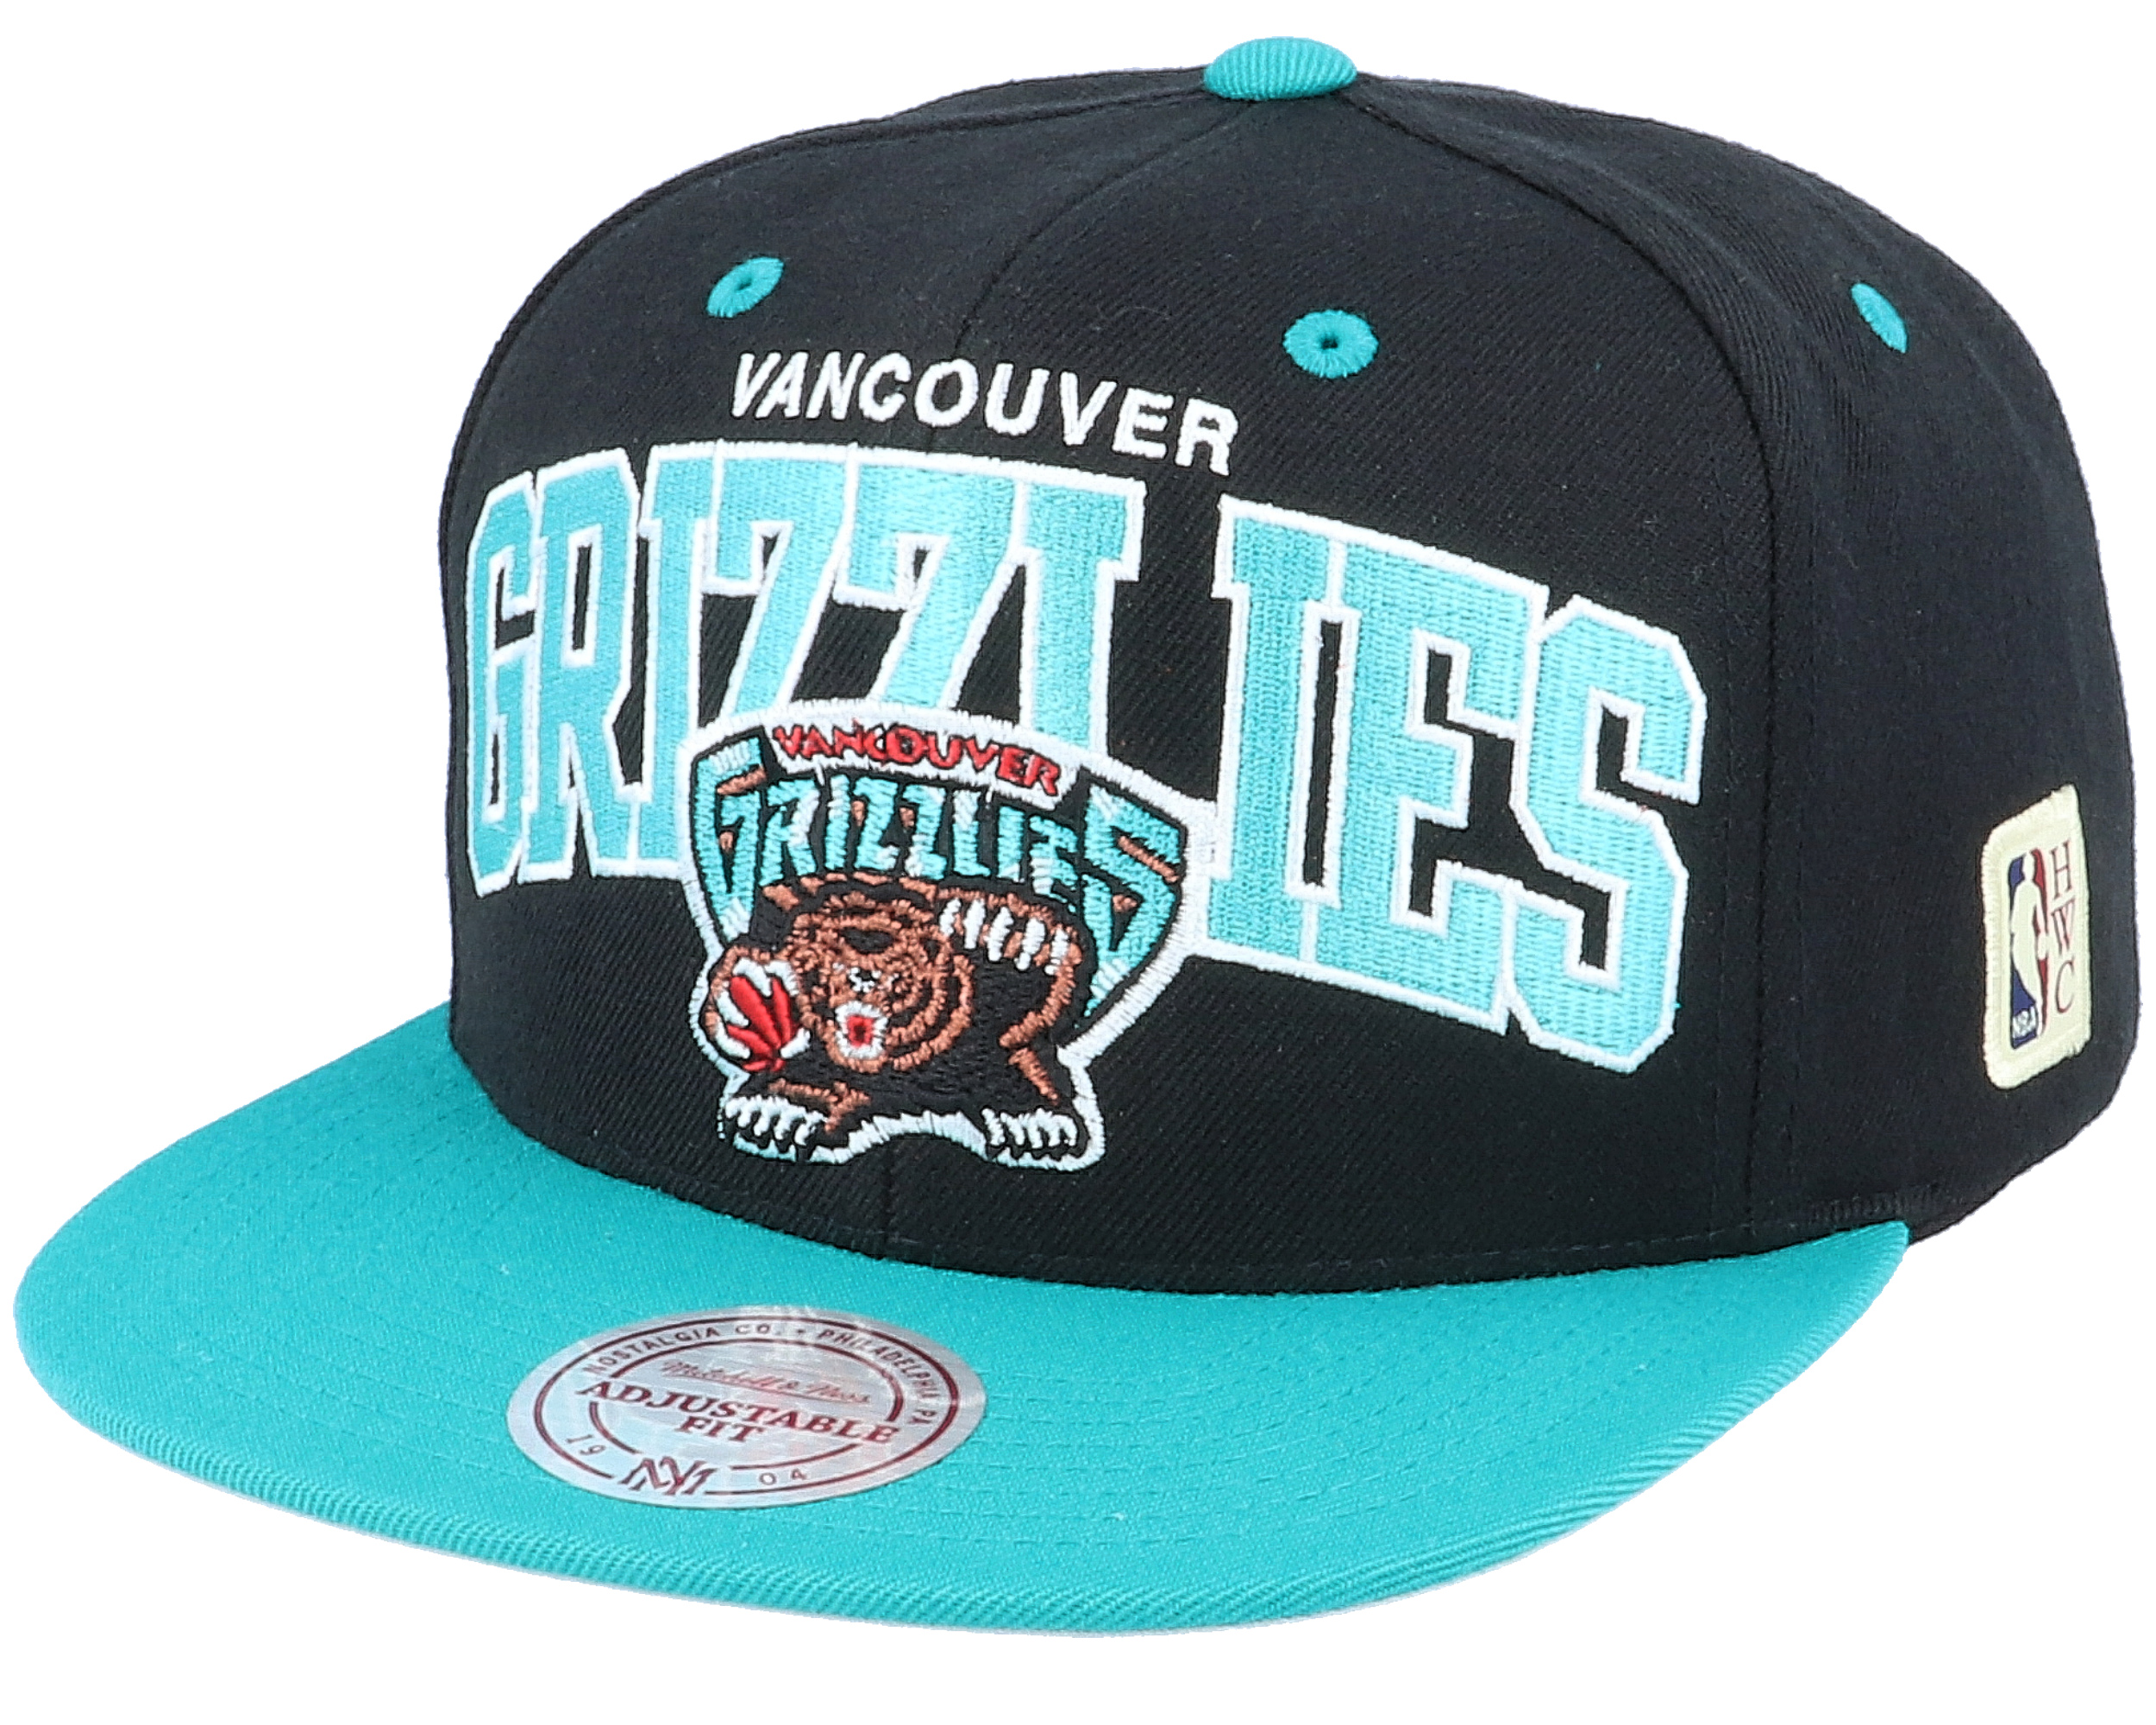 Mitchell & Ness Vancouver Grizzlies Snapback Hat